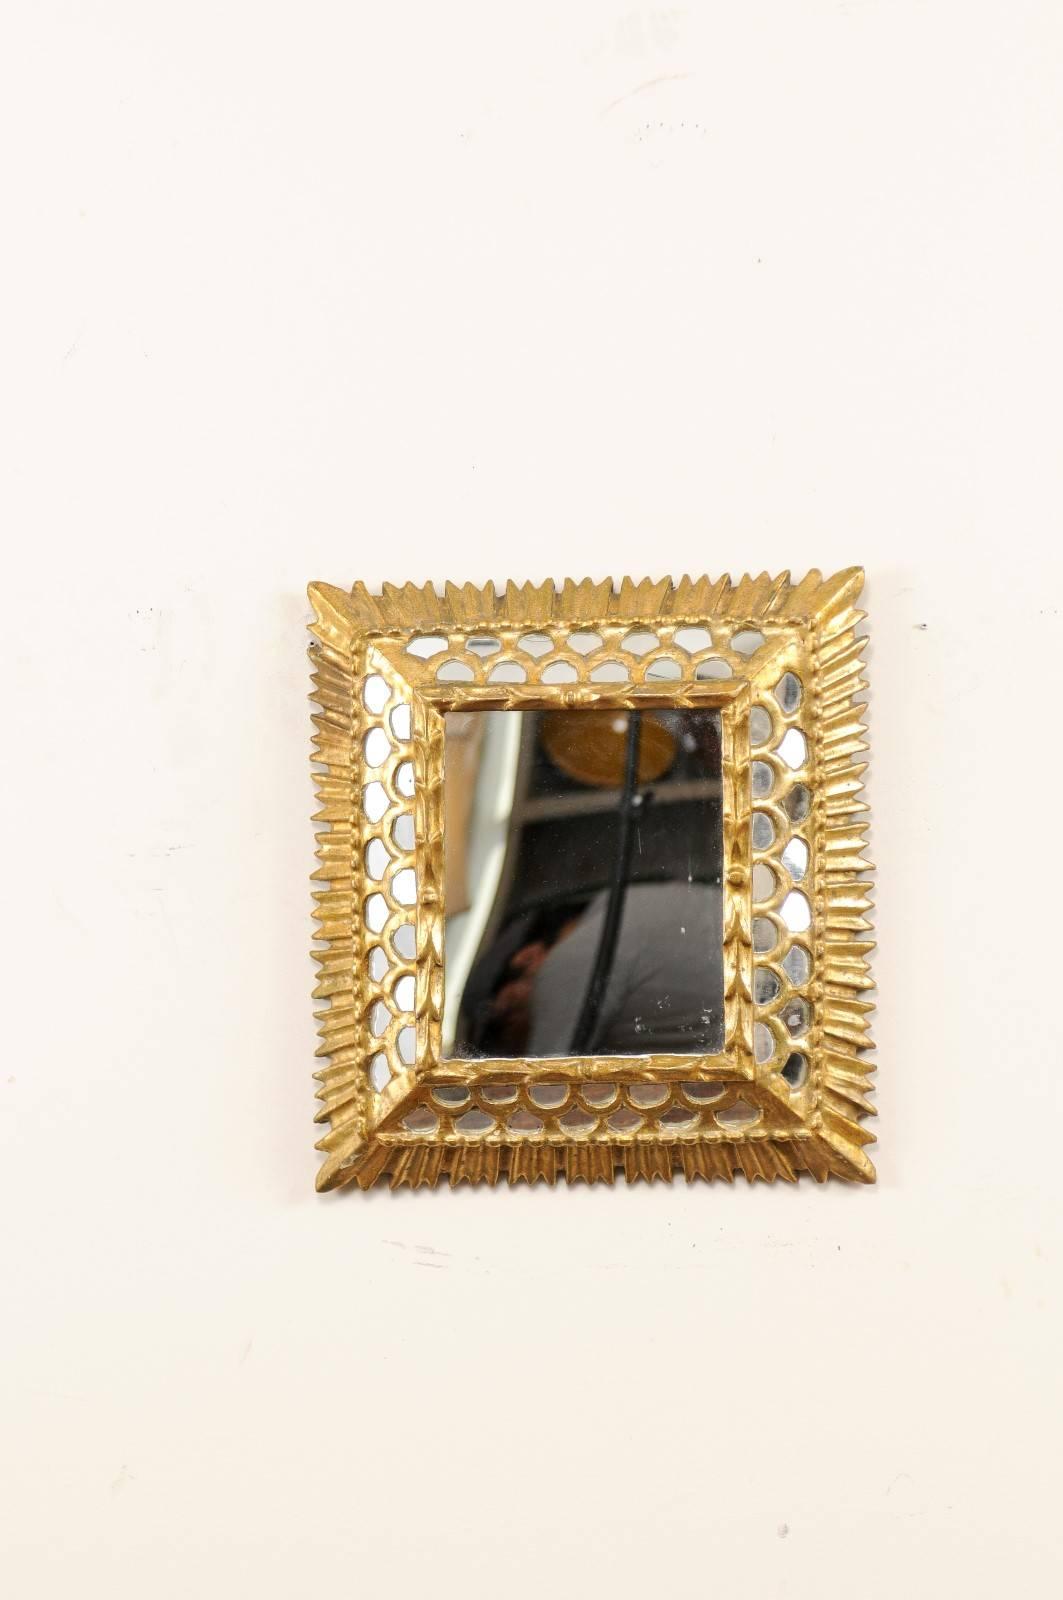 A vintage European small-sized mirror. This European small-sized gilded mirror features a raised centre surrounded by honeycomb lattice work with inset mirrors. The inner surround has tiny arrow like trim and the outer most edges have short ray tips